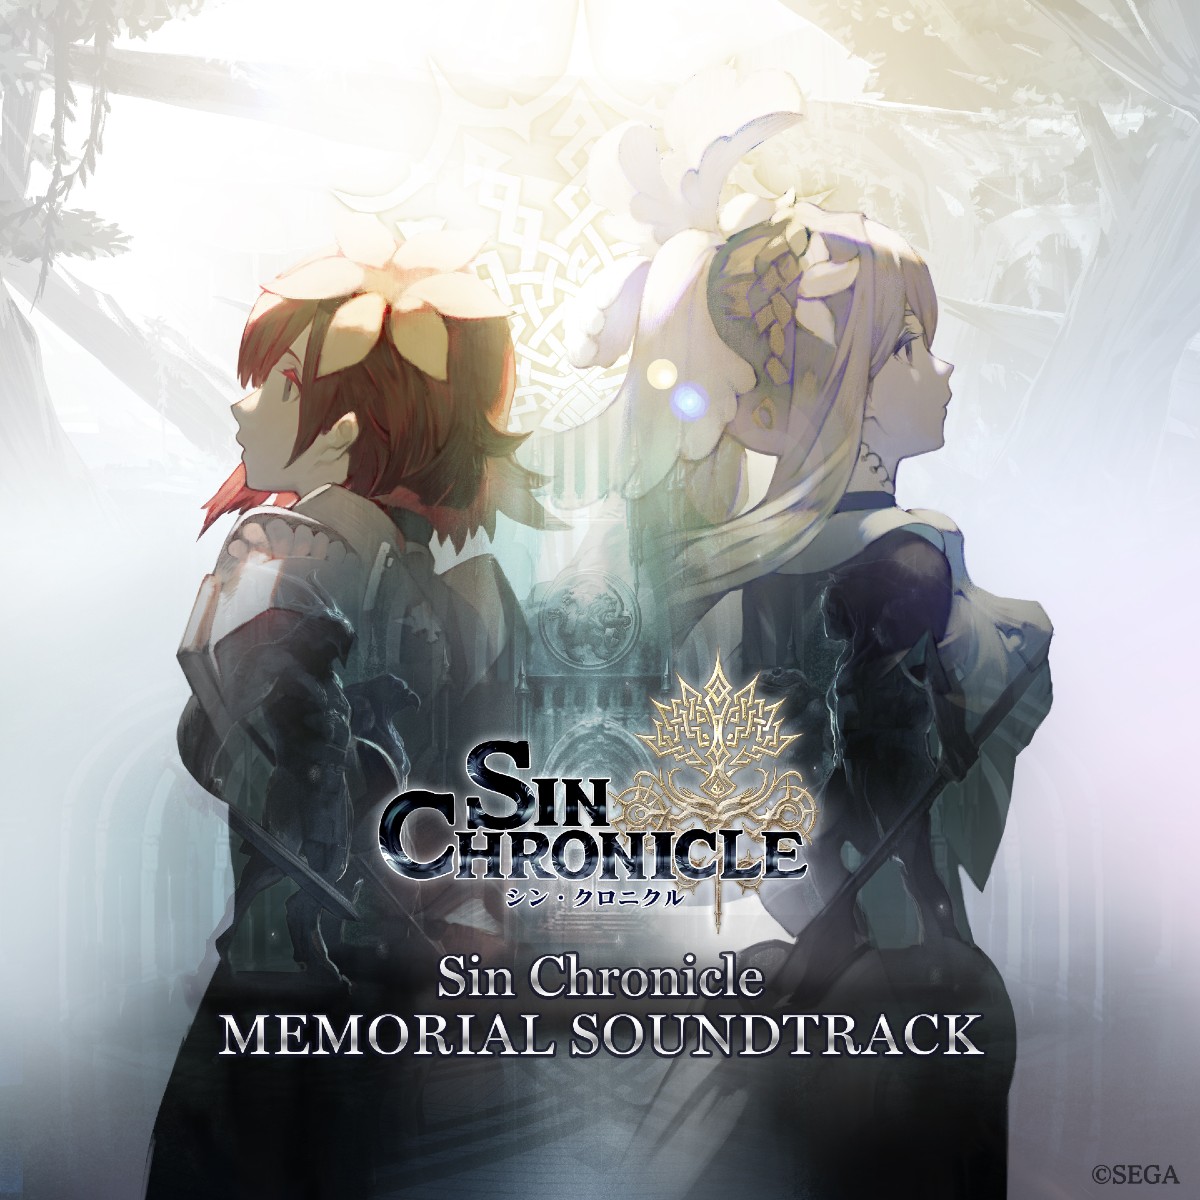 Sin Chronicle MEMORIAL SOUNDTRACK